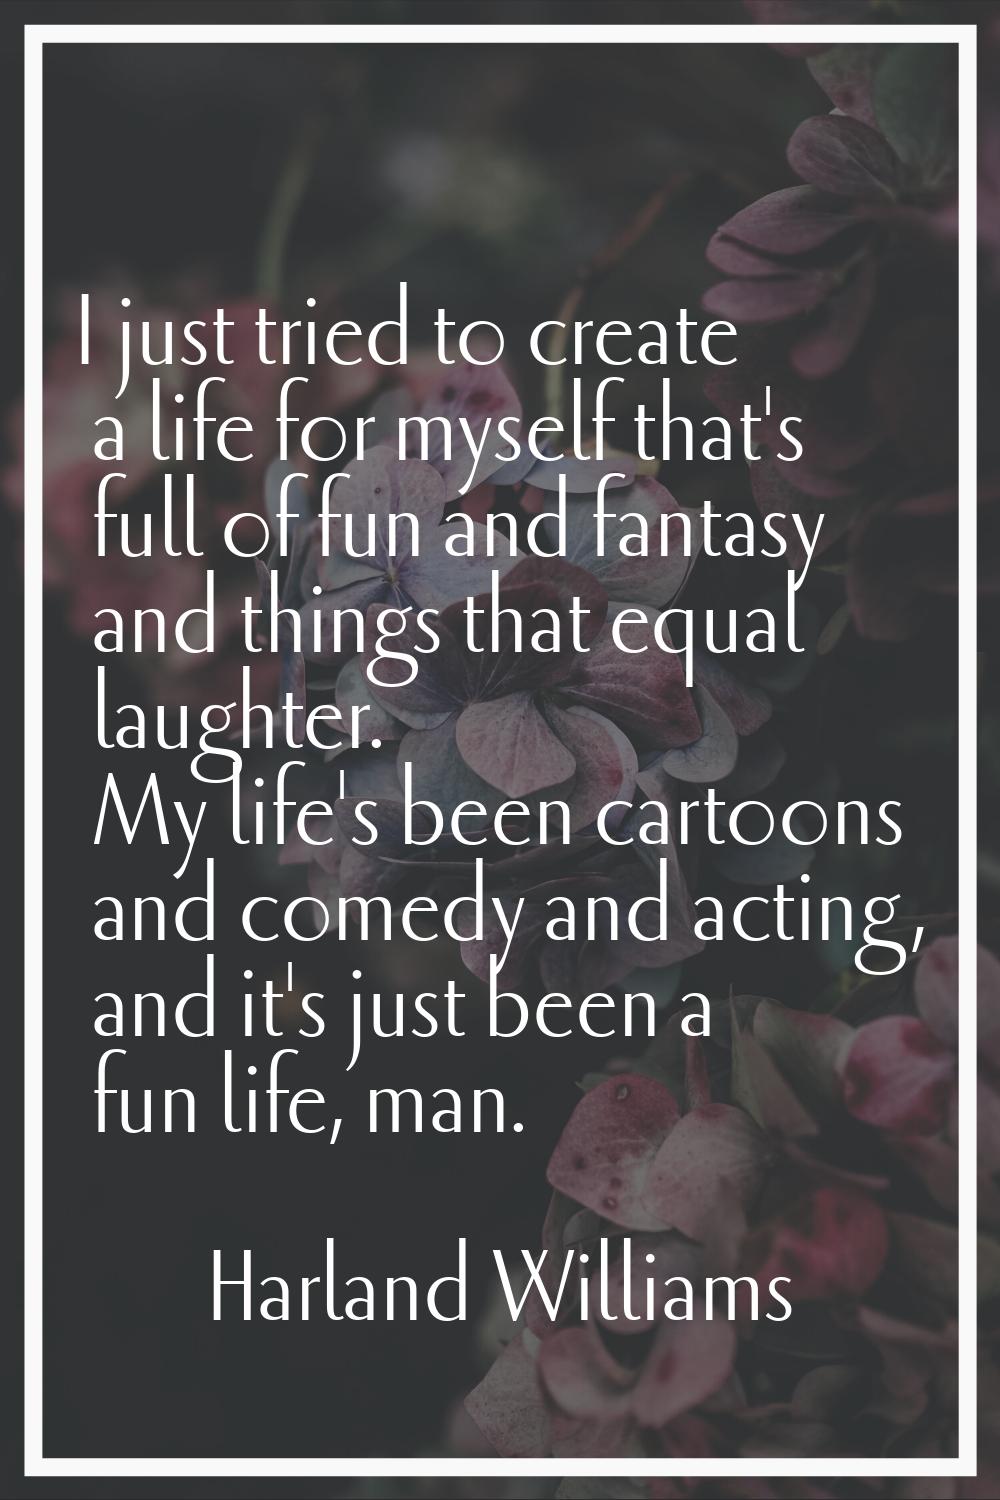 I just tried to create a life for myself that's full of fun and fantasy and things that equal laugh